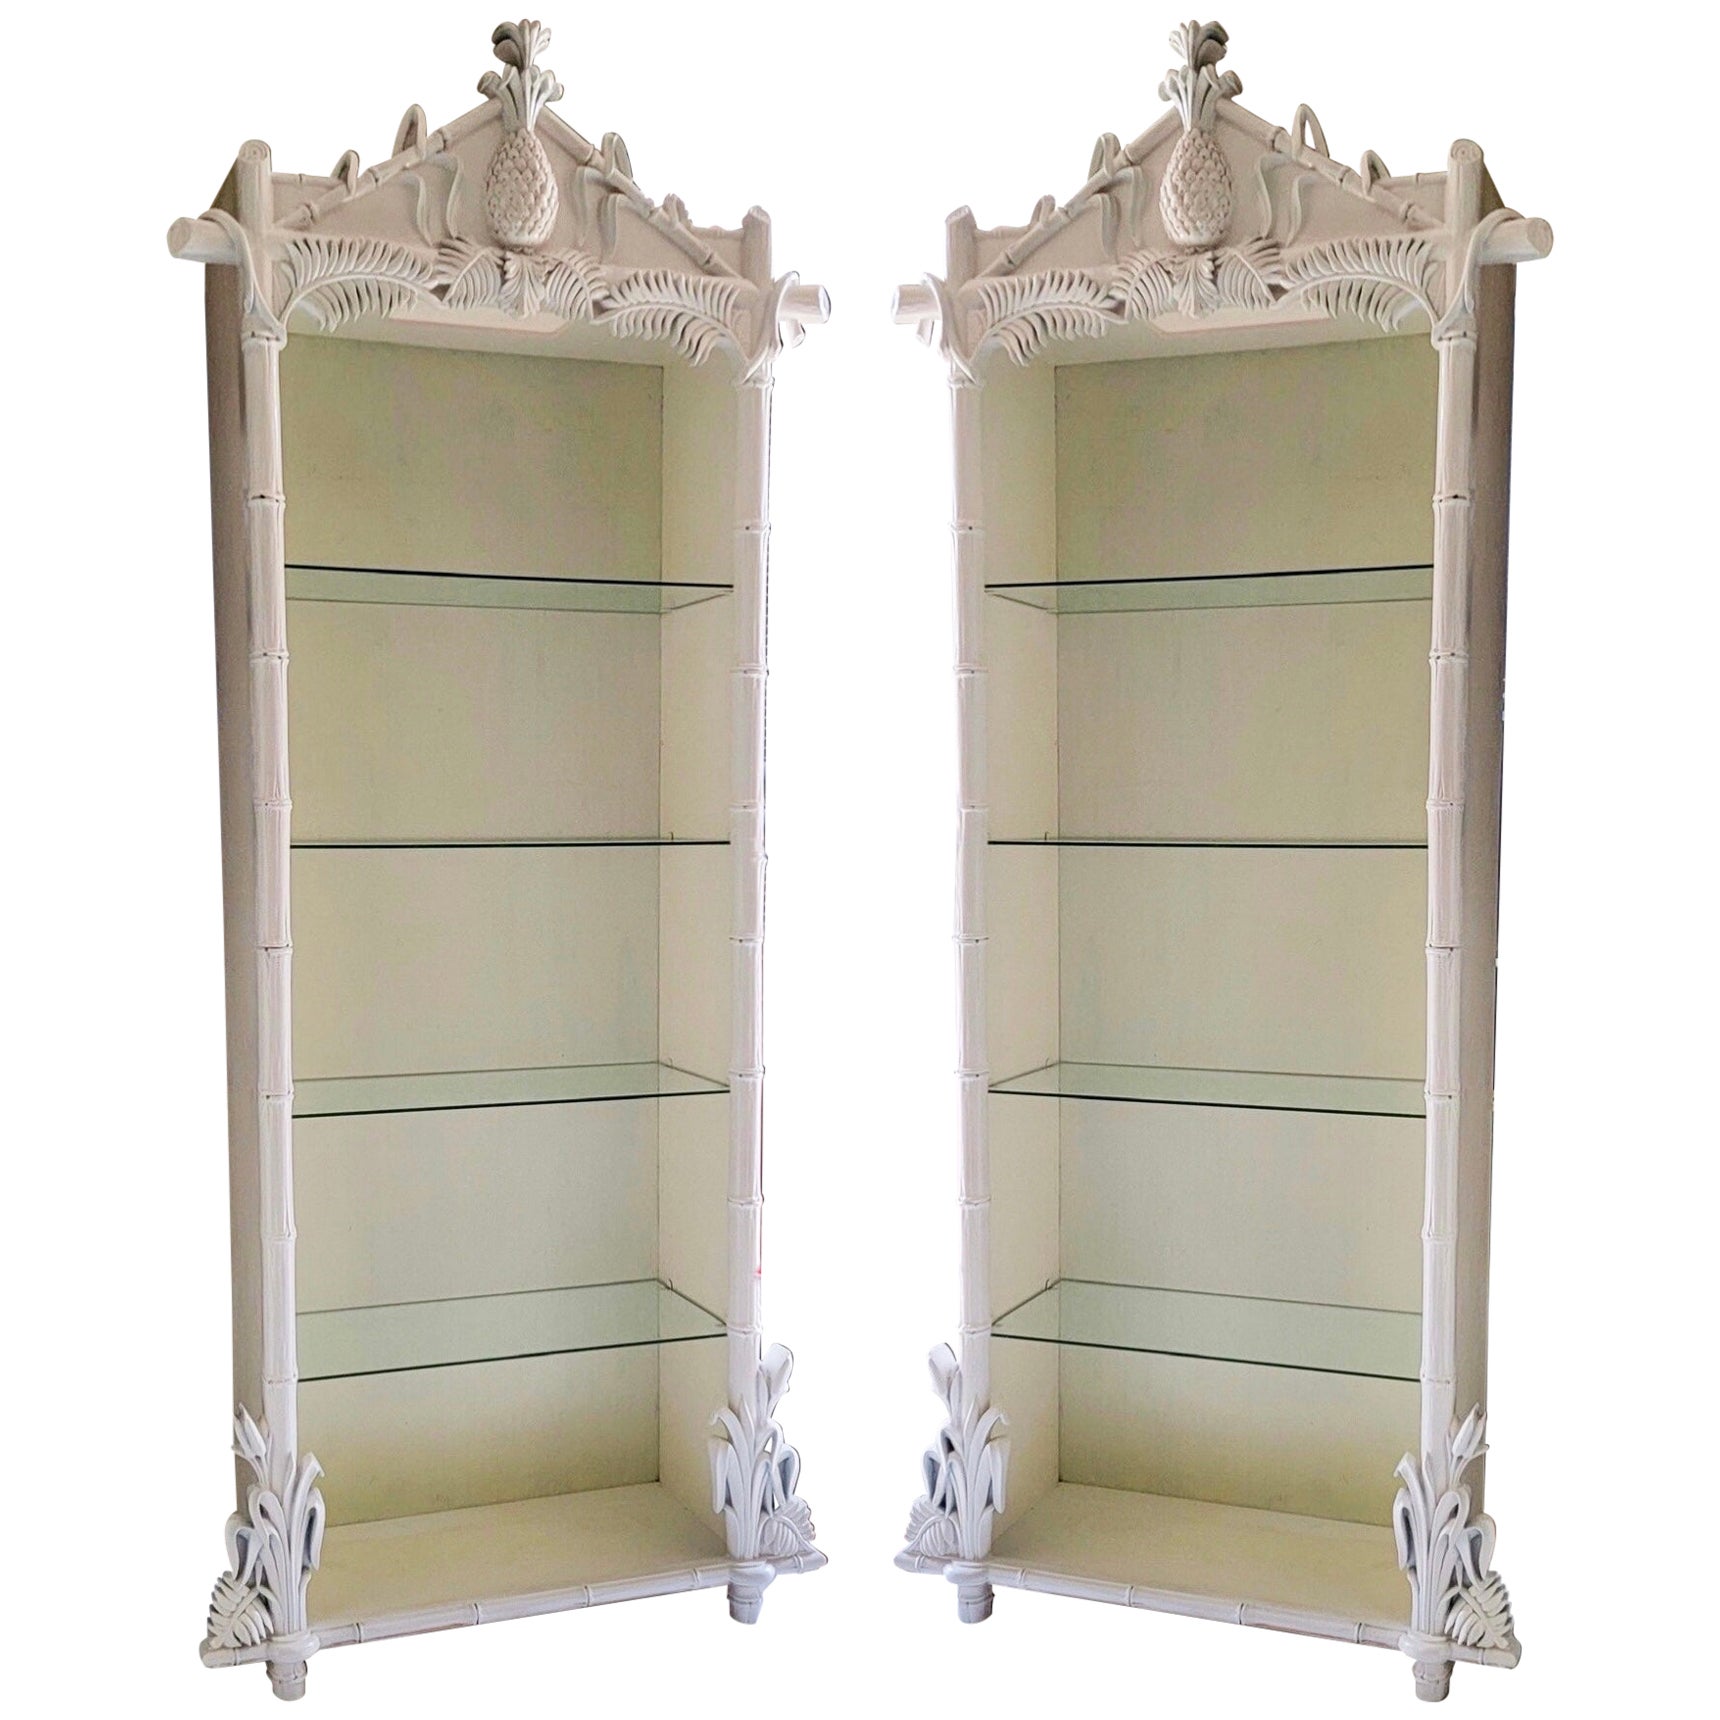 I have not had these bookcases attributed to Gampel-Stoll before now! They are painted white with glass shelves. They could be illuminated. At their widest, branch to branch, they are 37” in length. The bookcase portion is 29.5” in length. They are